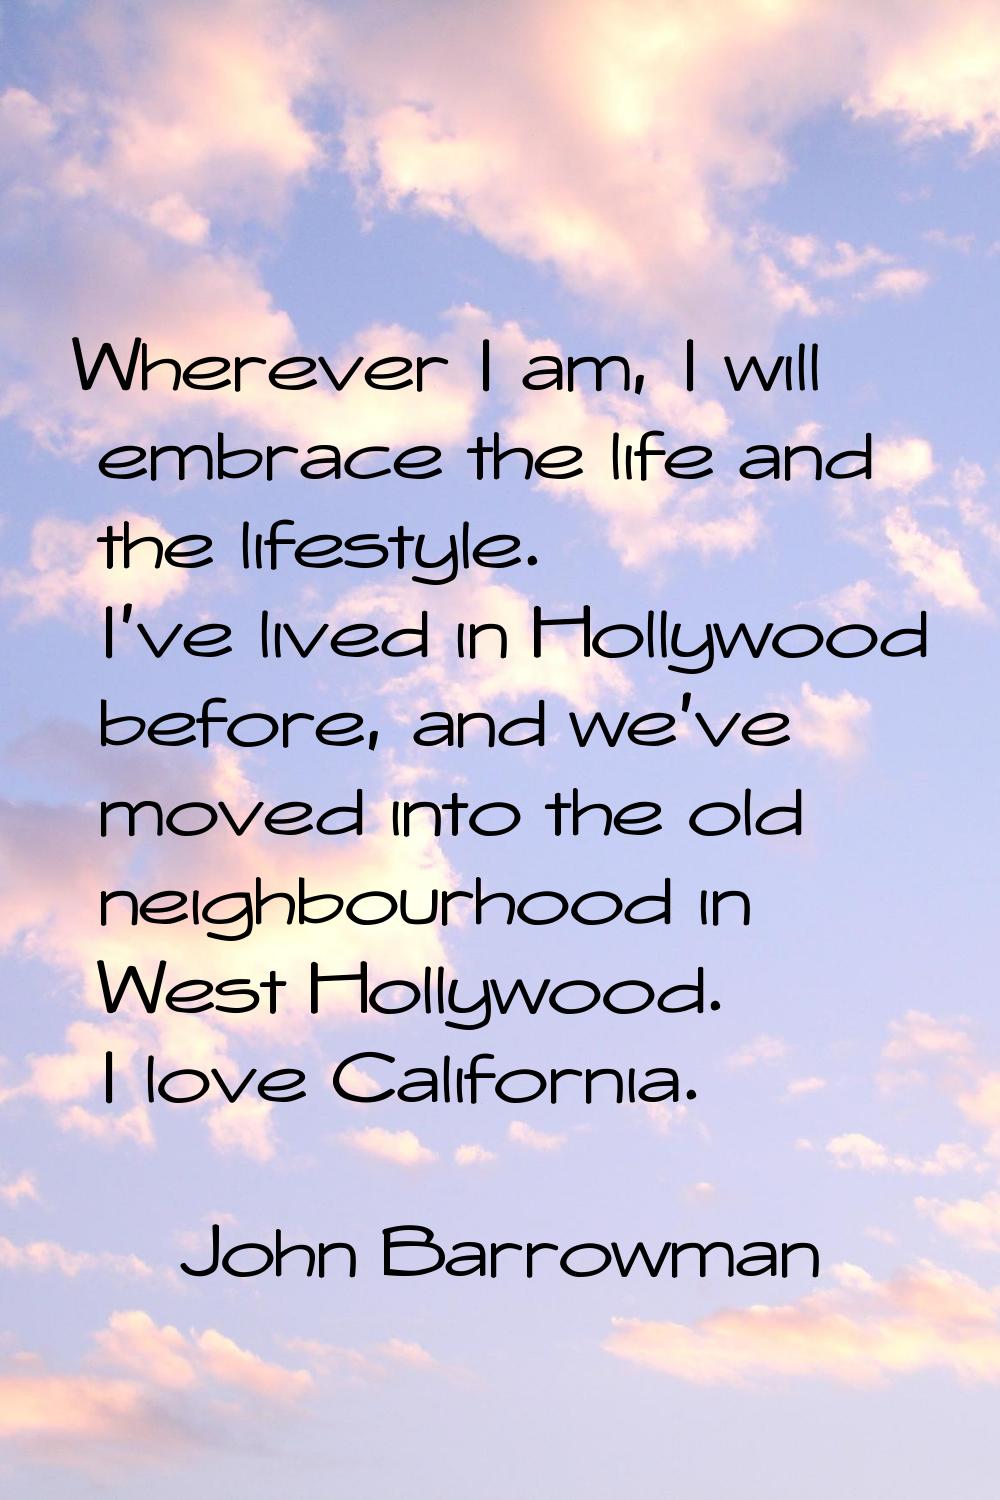 Wherever I am, I will embrace the life and the lifestyle. I've lived in Hollywood before, and we've